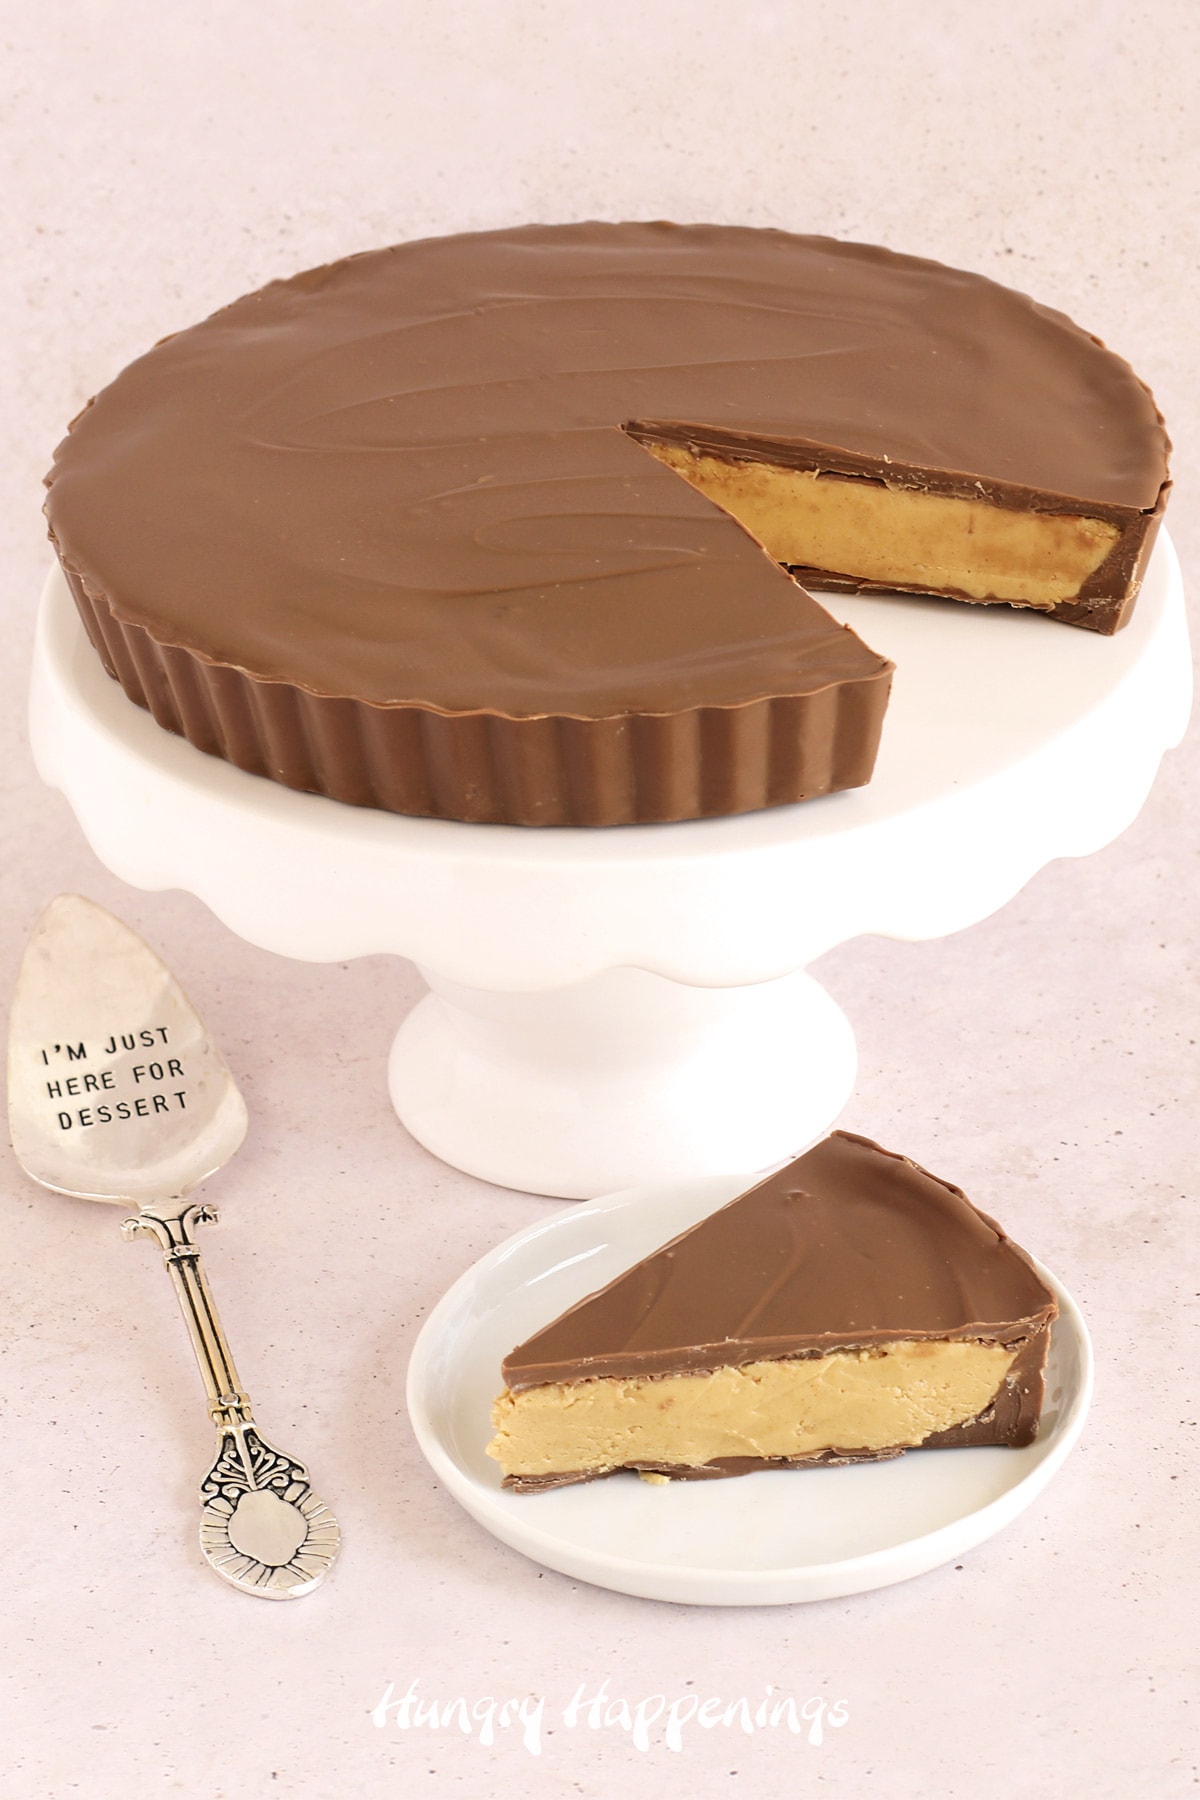 Copycat Reese's Thanksgiving Pie - a giant chocolate peanut butter cup.